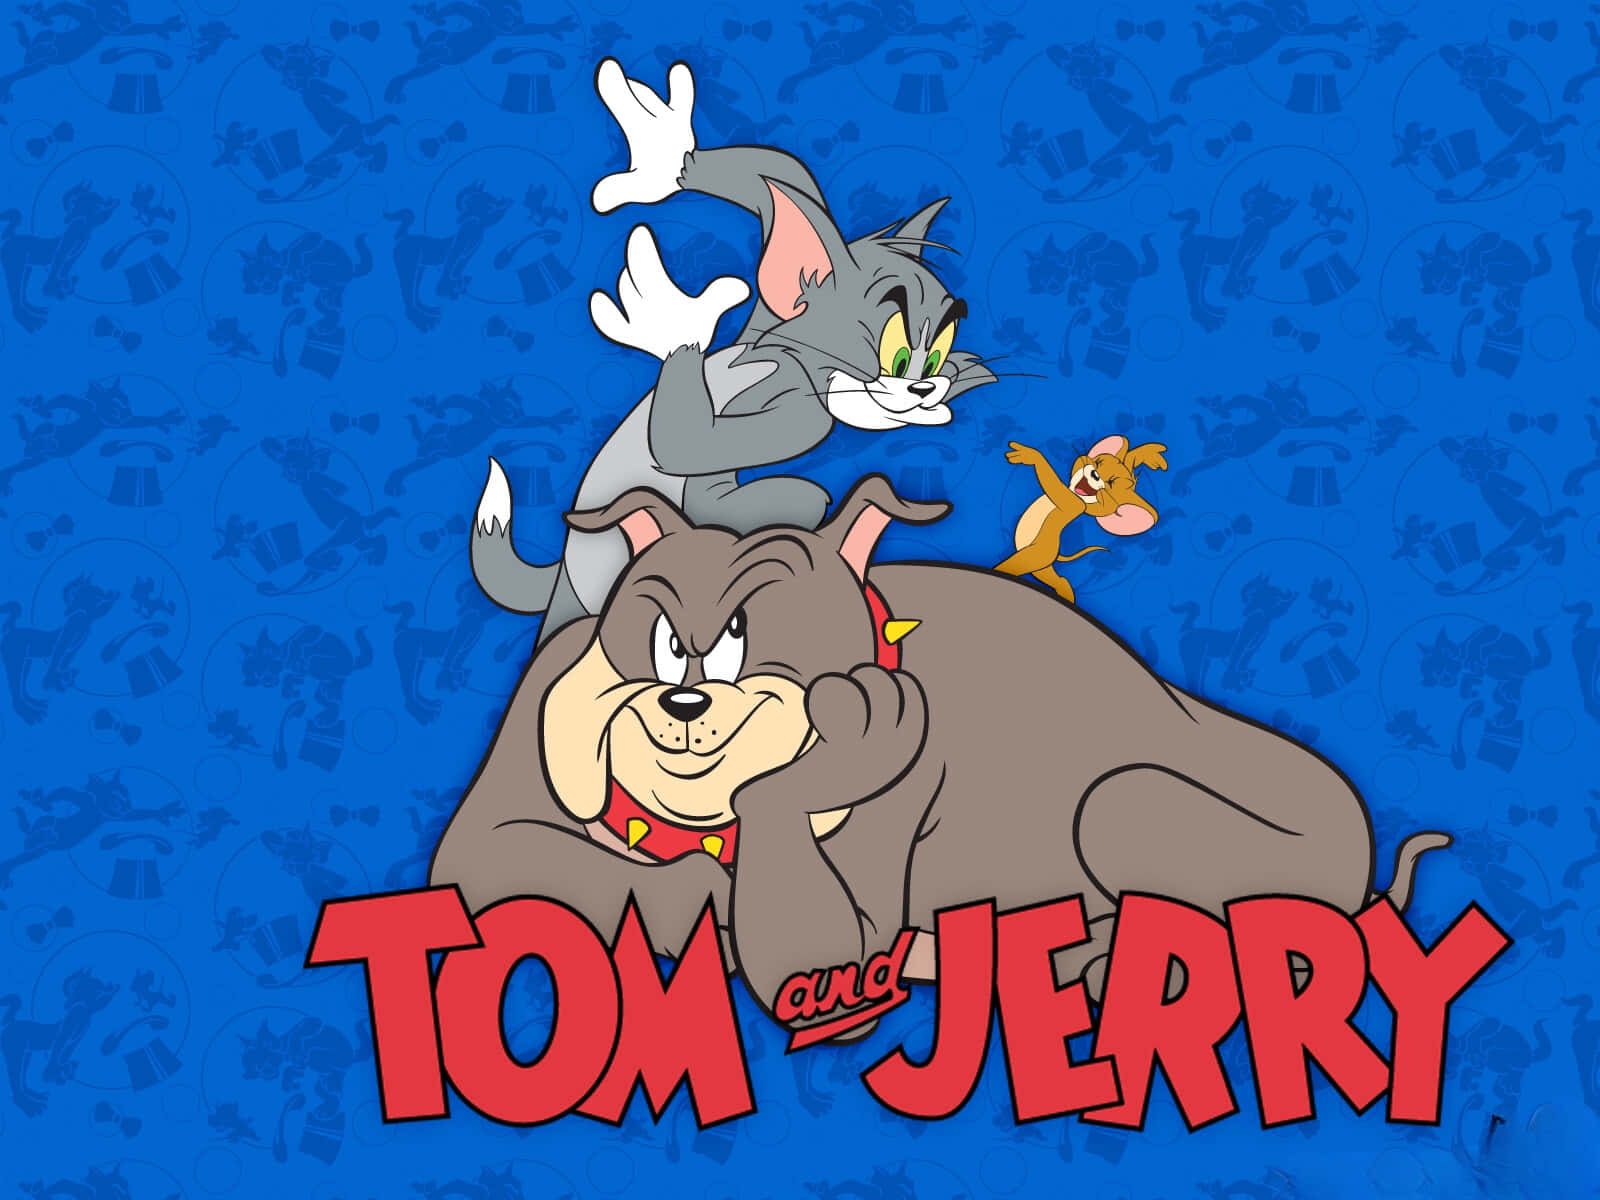 "Tom and Jerry - The Endless Chase"